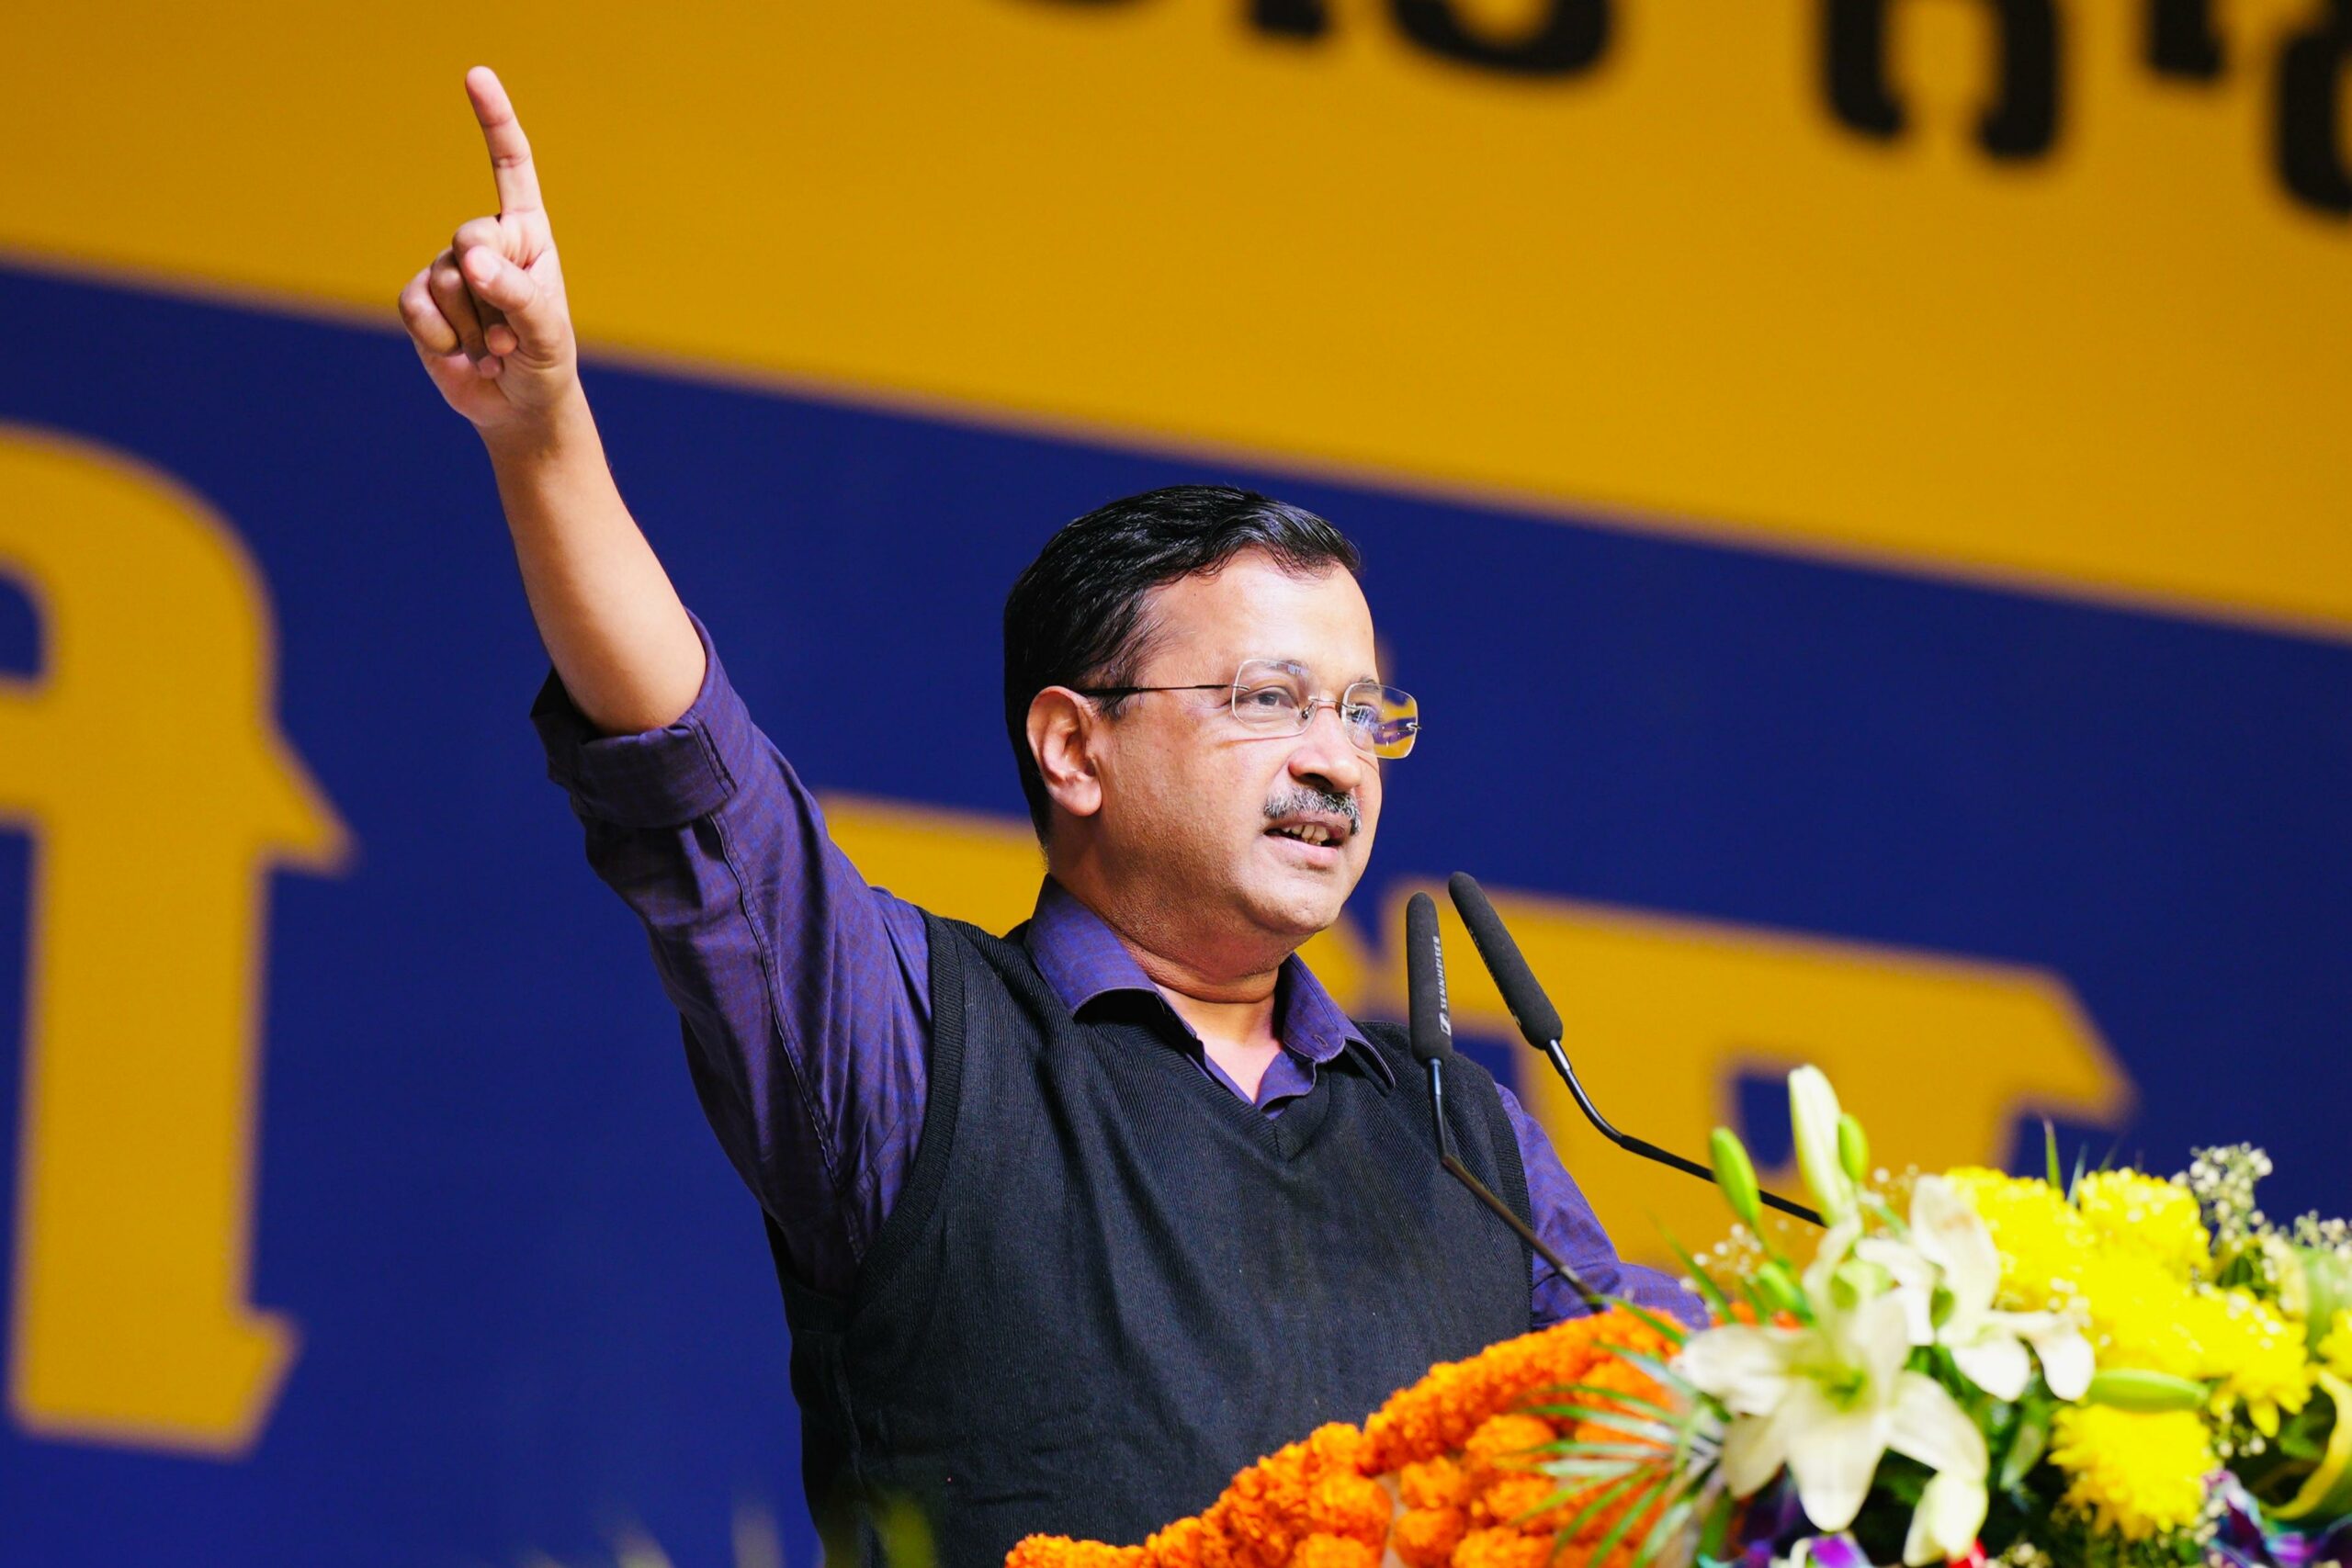 Delhi excise policy case: ED issues 5th summons to Delhi Chief Minister Arvind Kejriwal